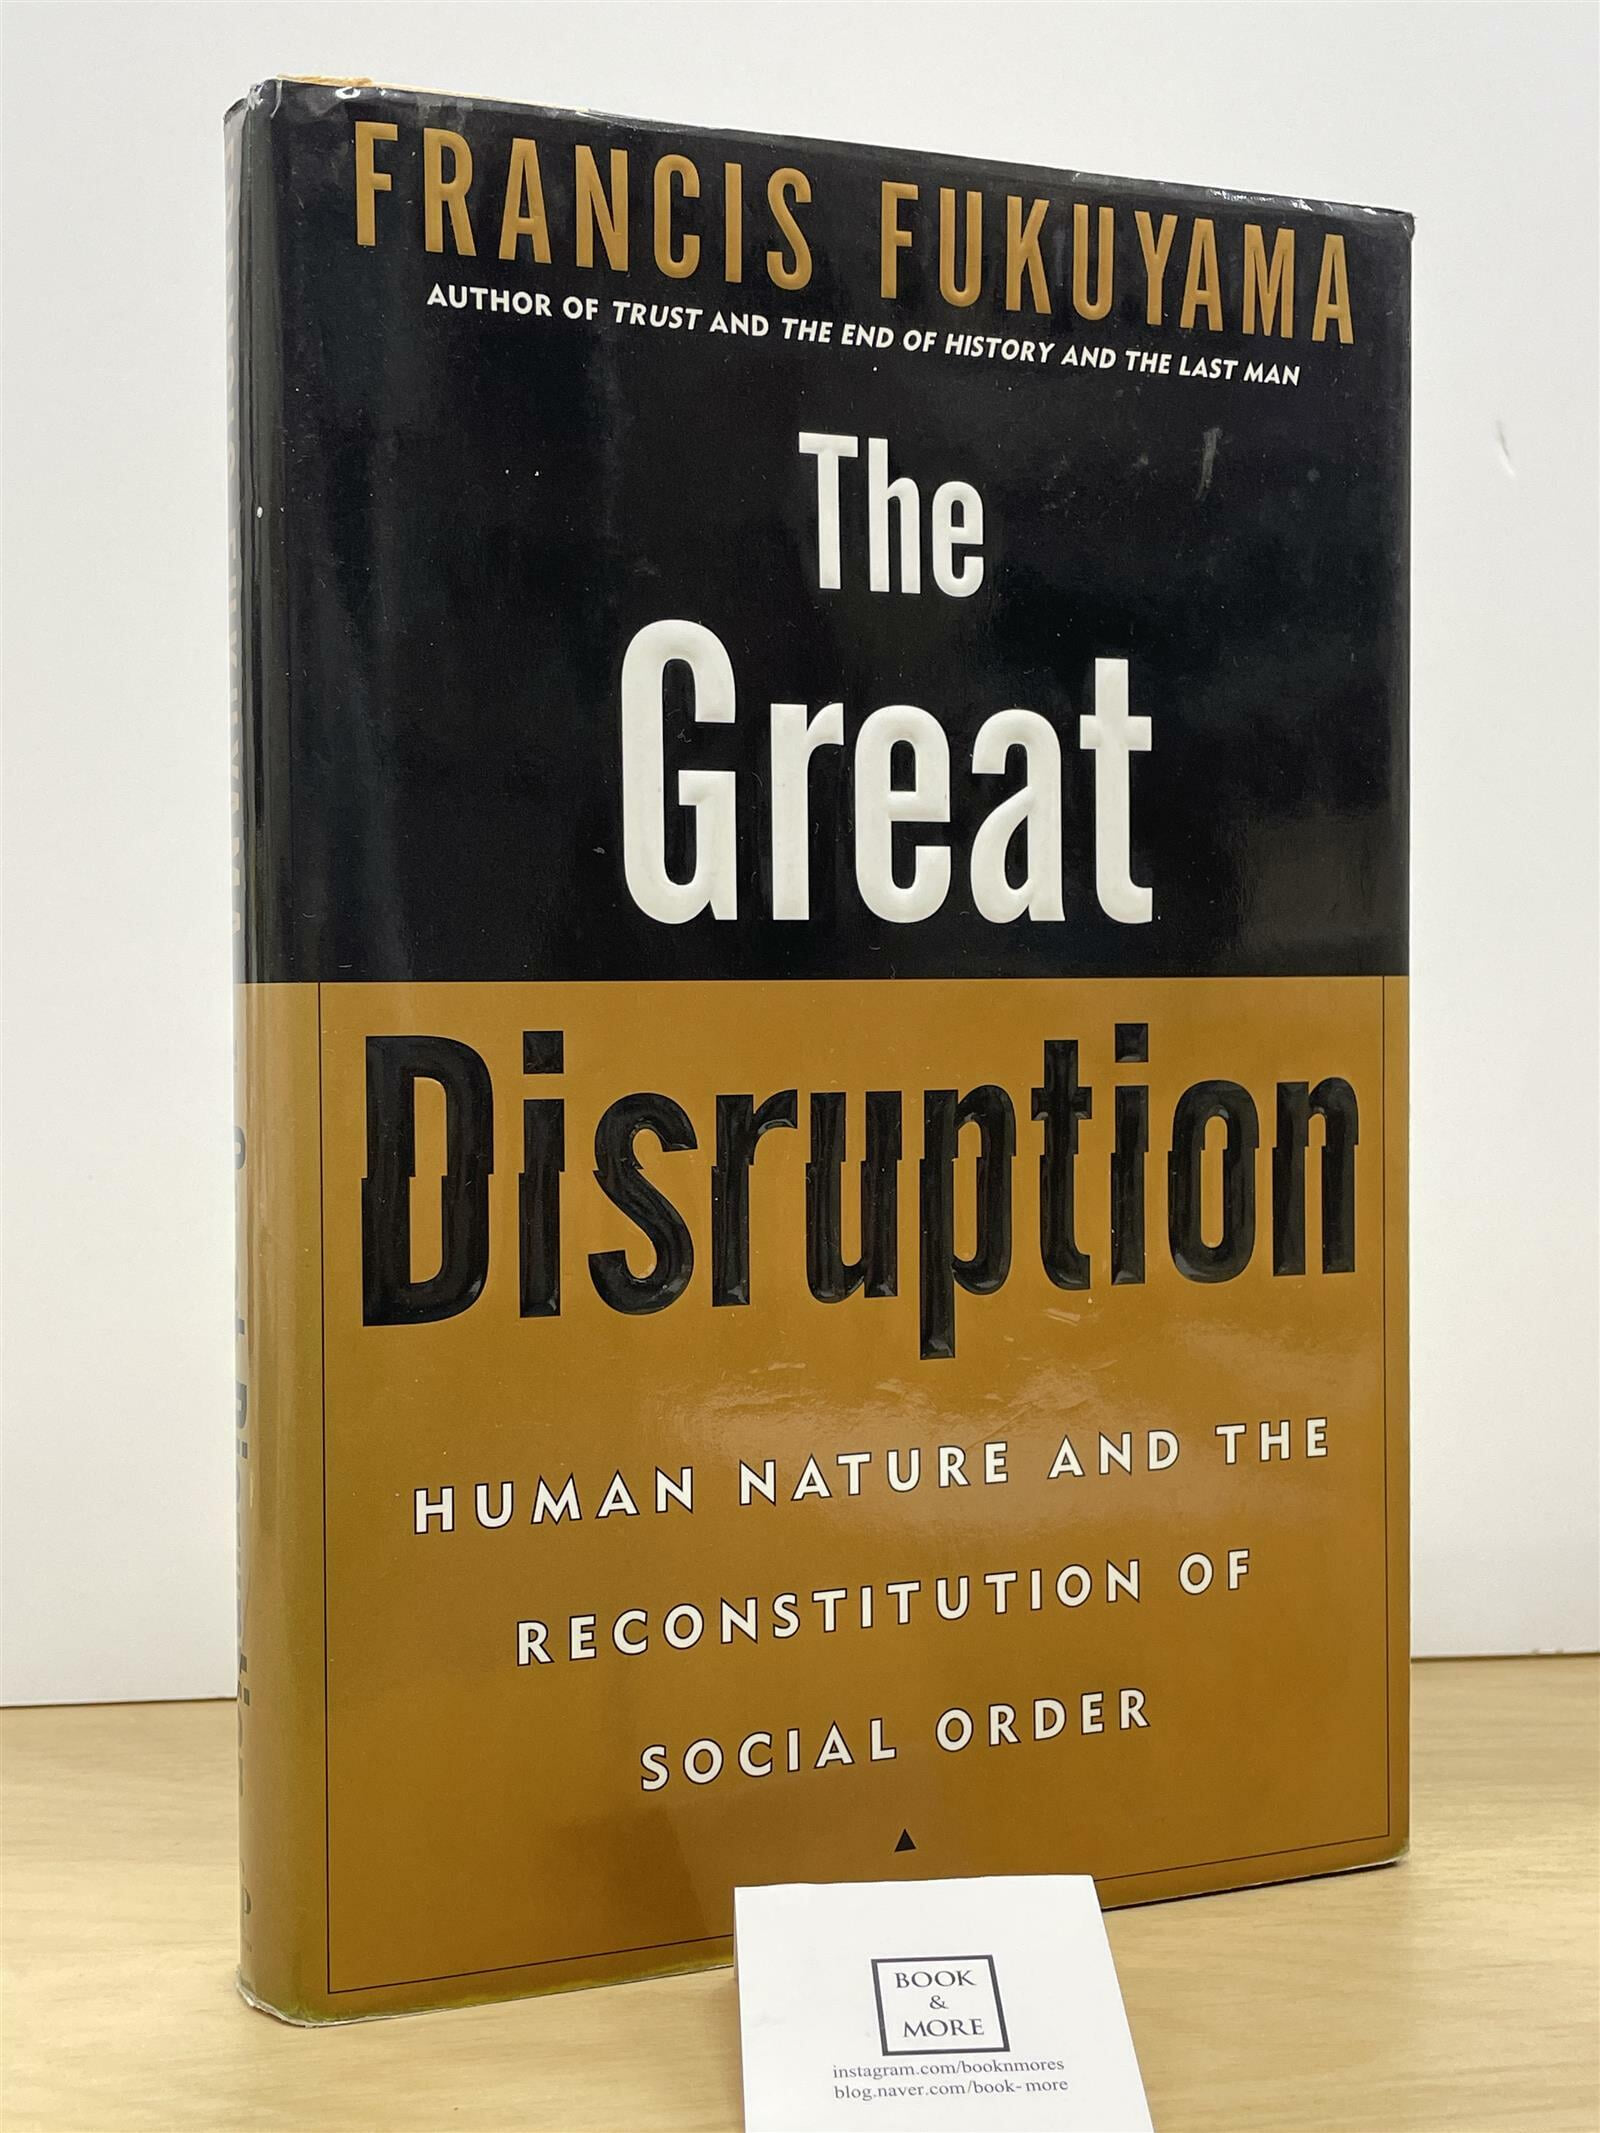 The Great Disruption: Human Nature and the Reconstitution of Social Order